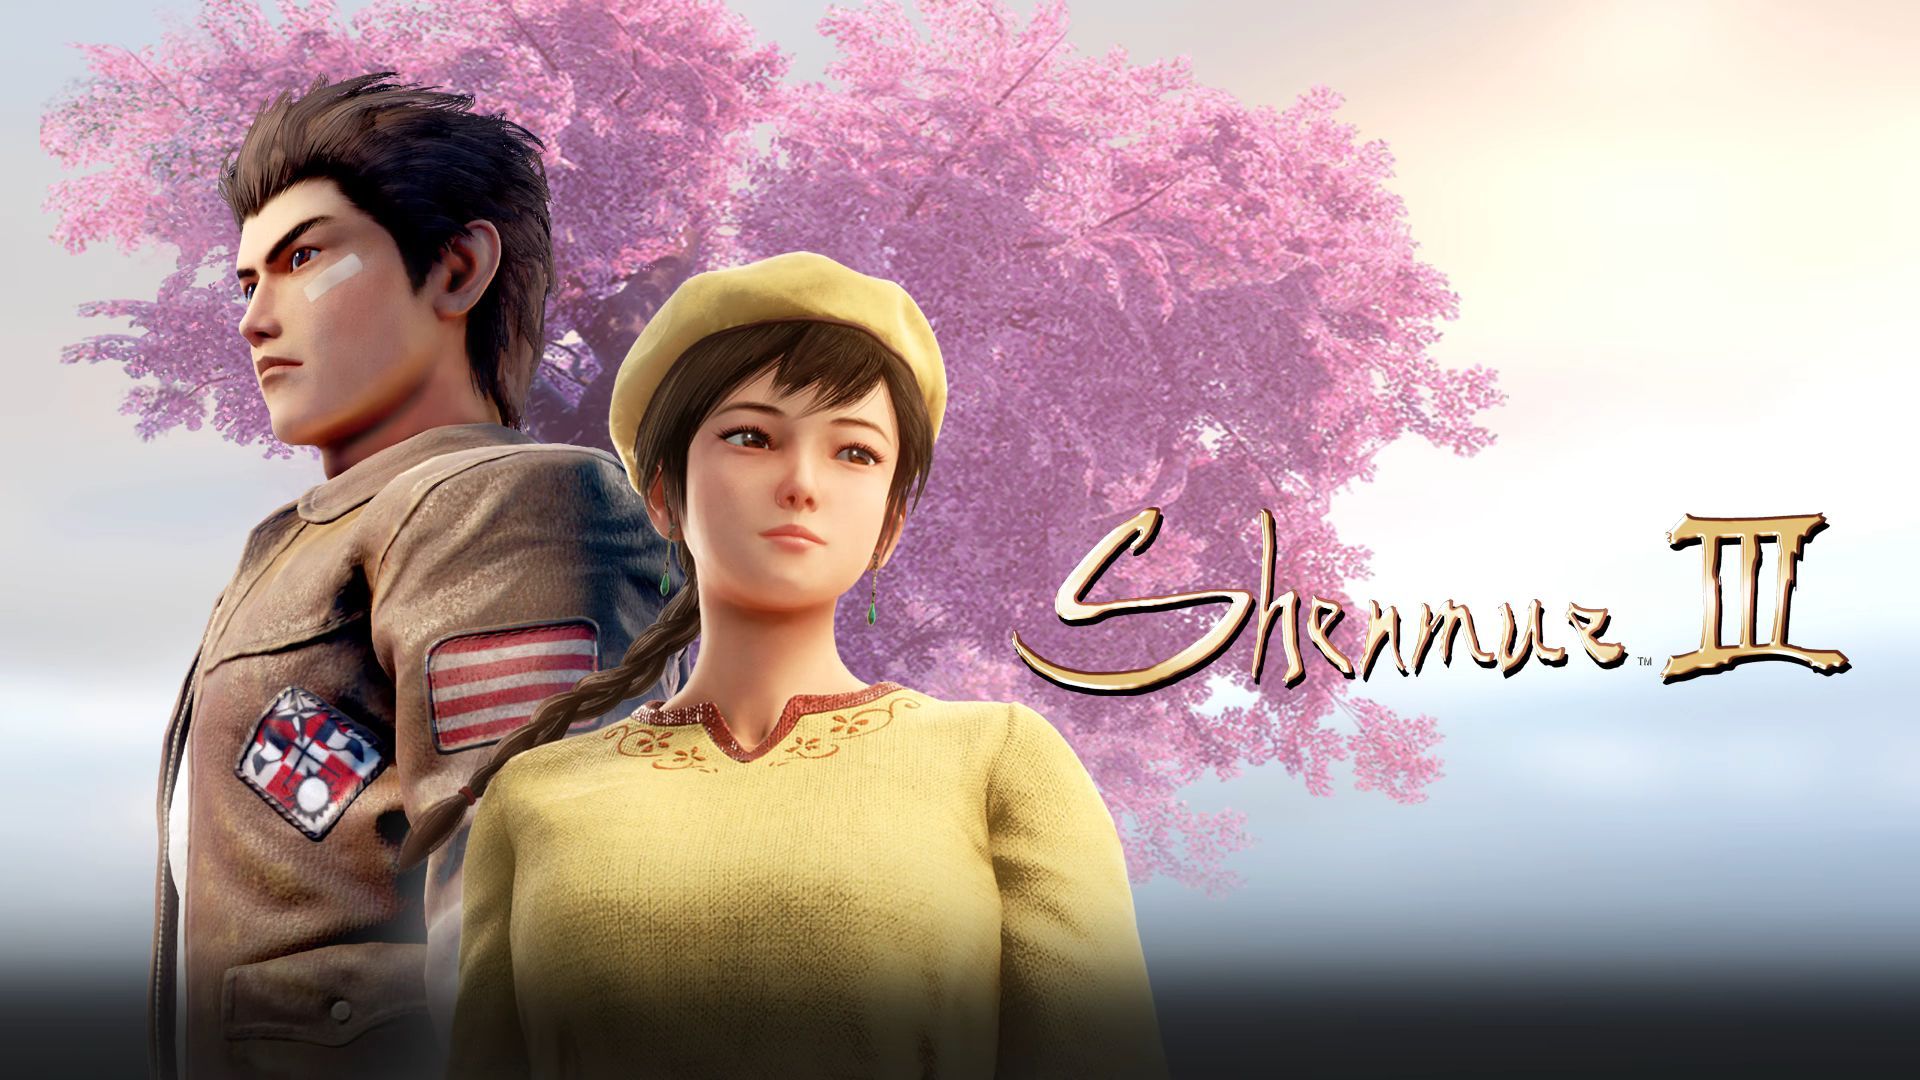 shenmue 3 xbox one